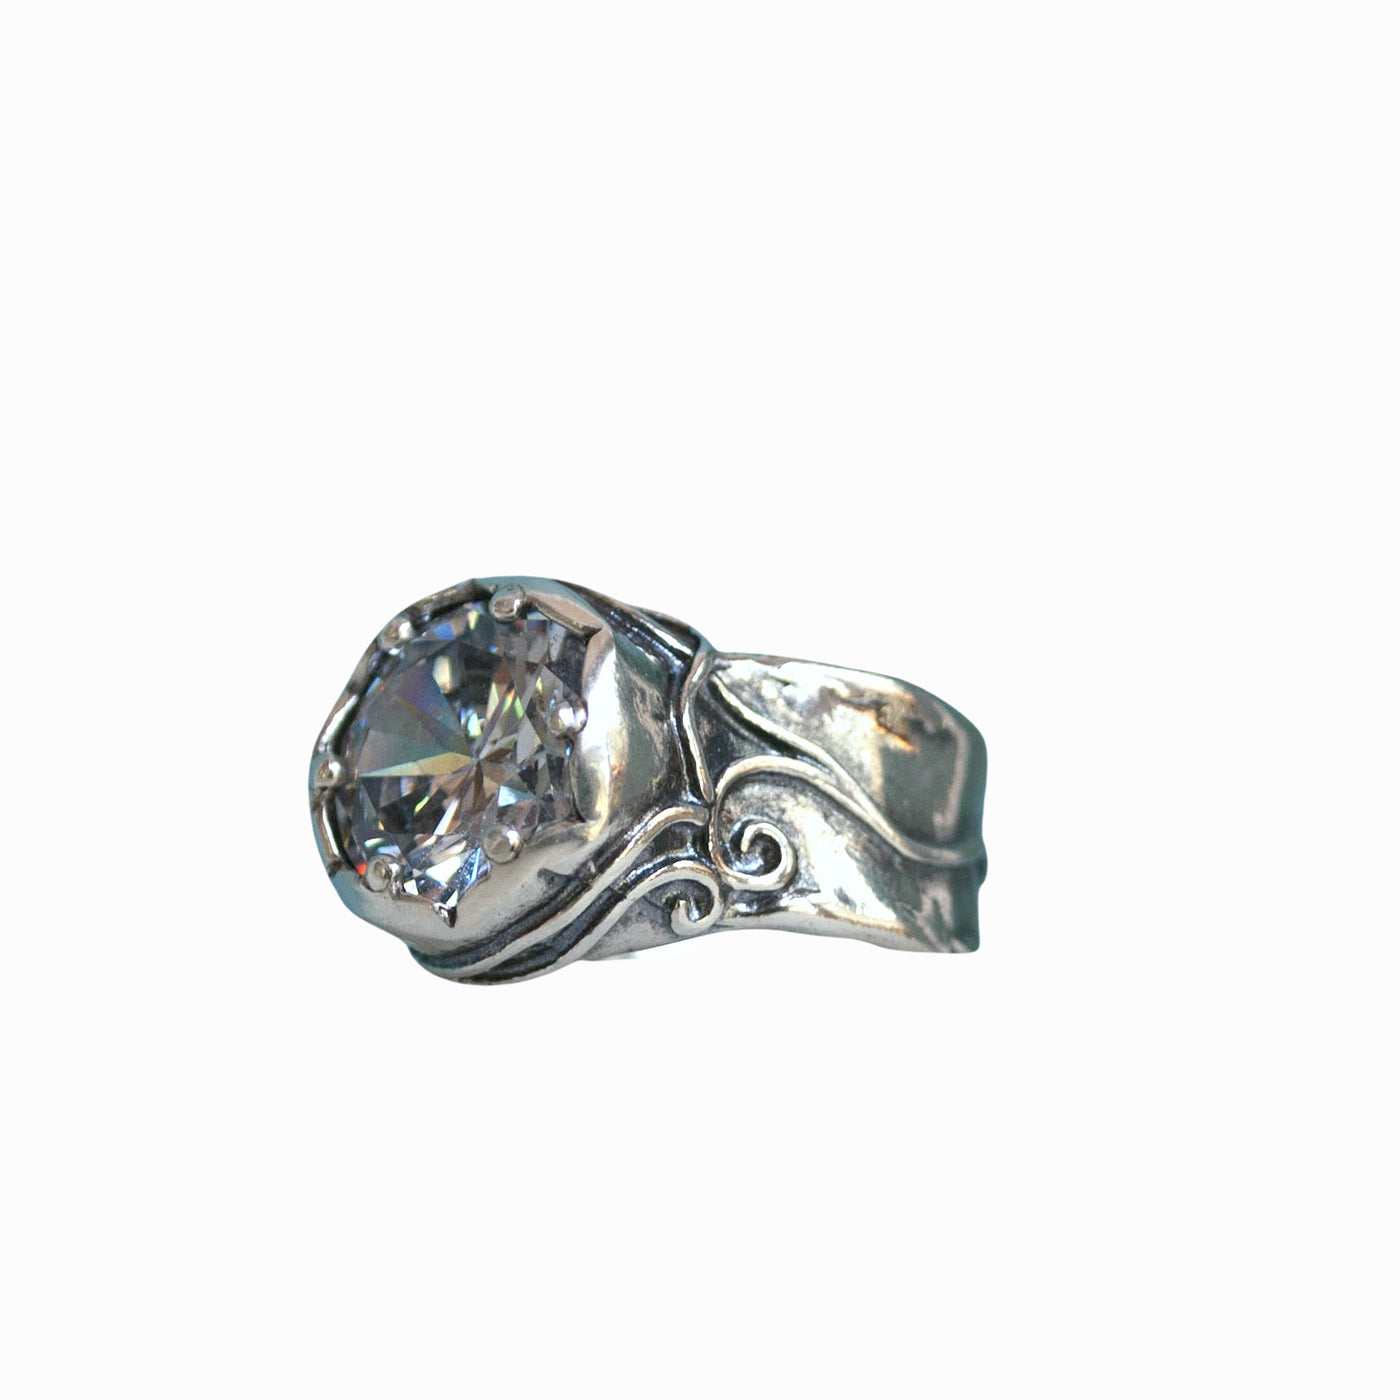 Silver Ring with large clear cz- artisan-crafted of .925 sterling silver. Whole sizes 5-10. Alternative side view